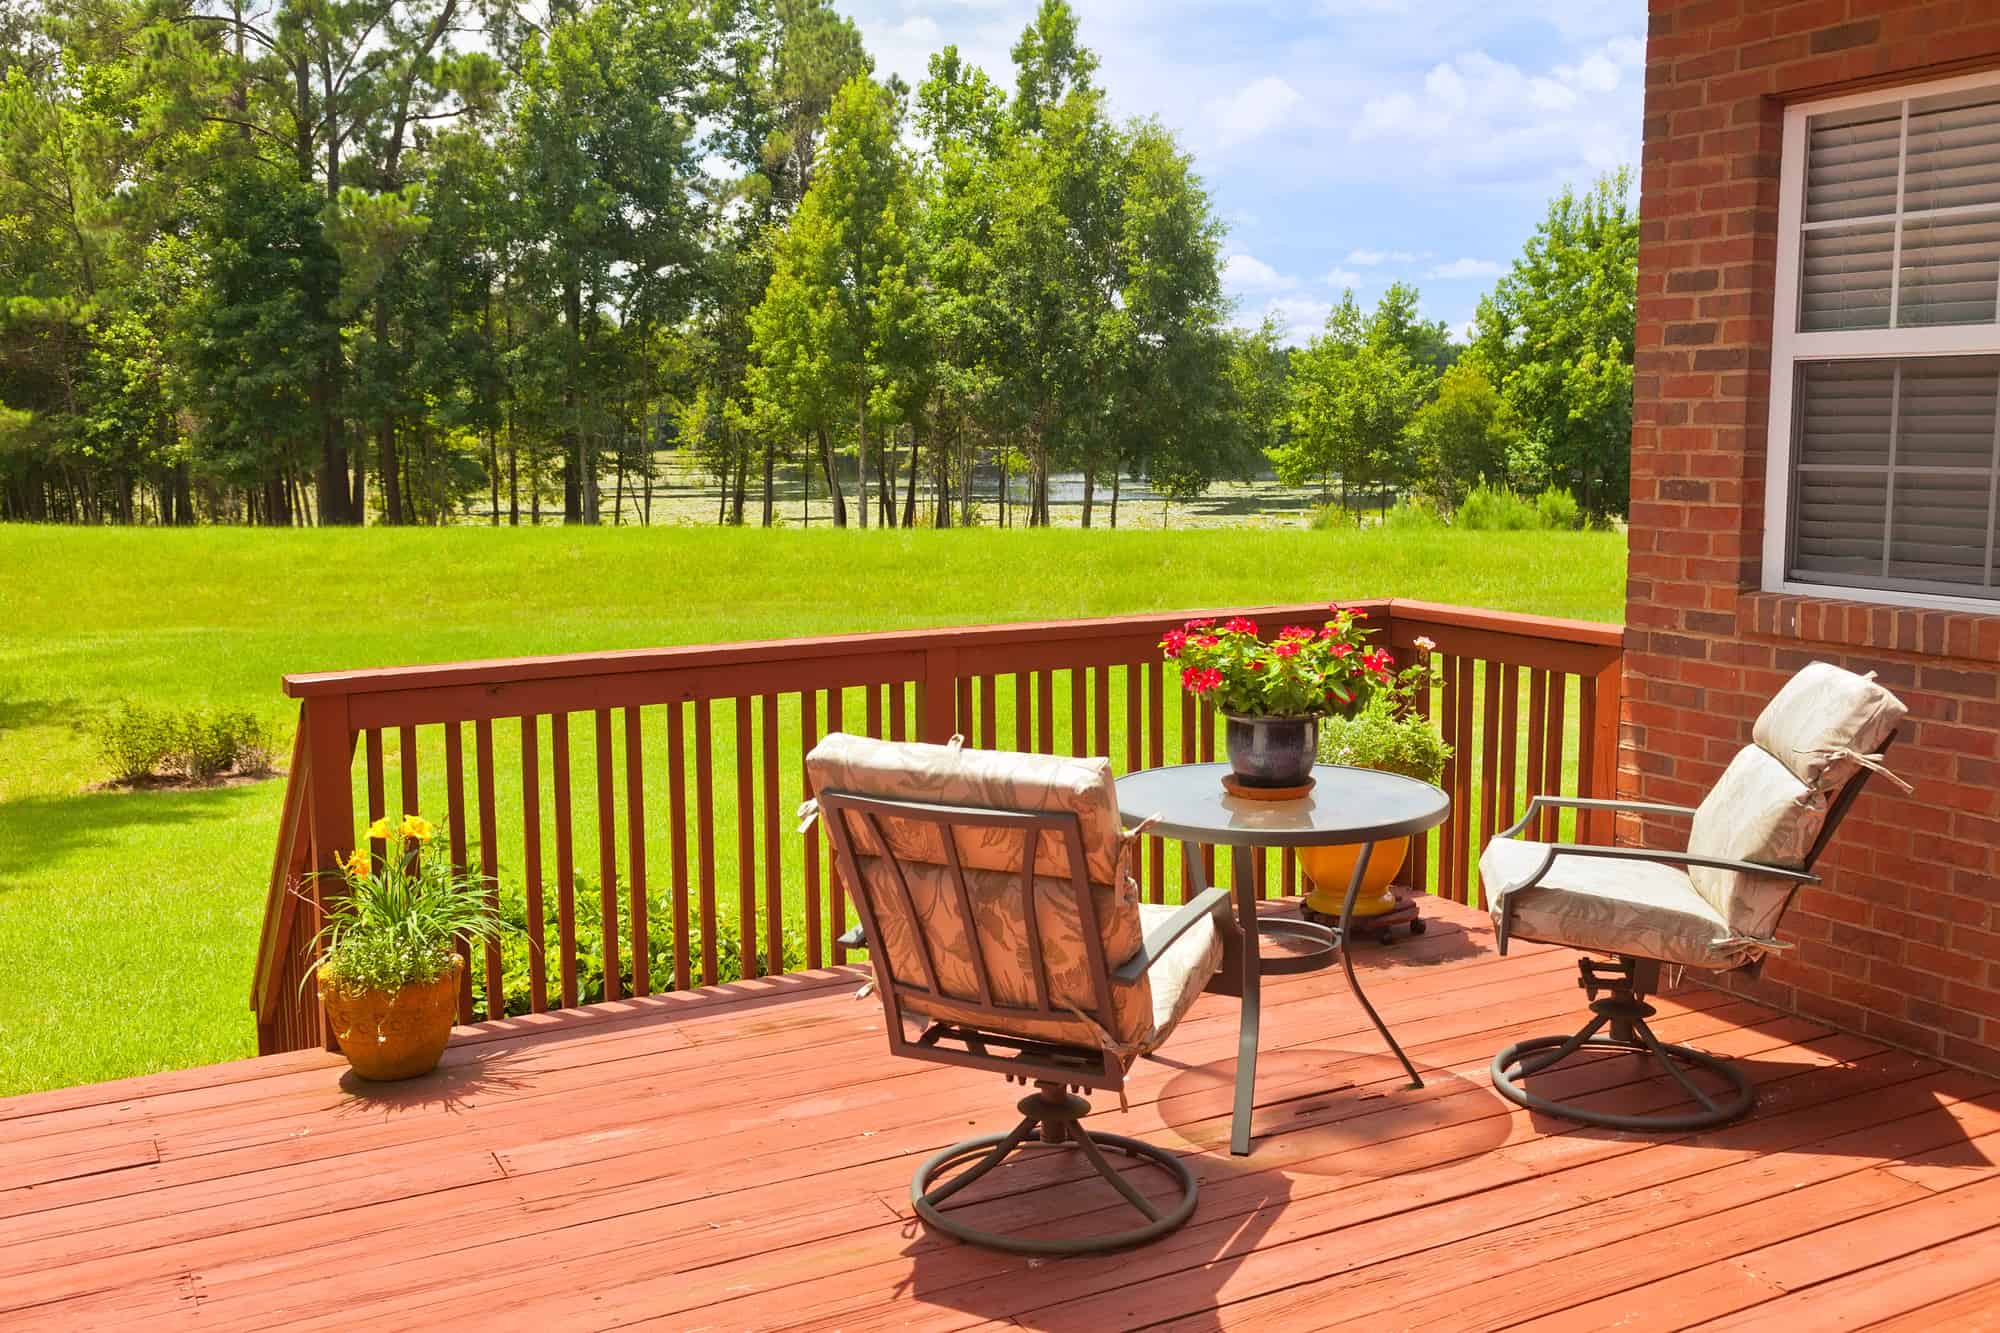 What Is the Best Decking Material?, What Is the Best Decking Material?